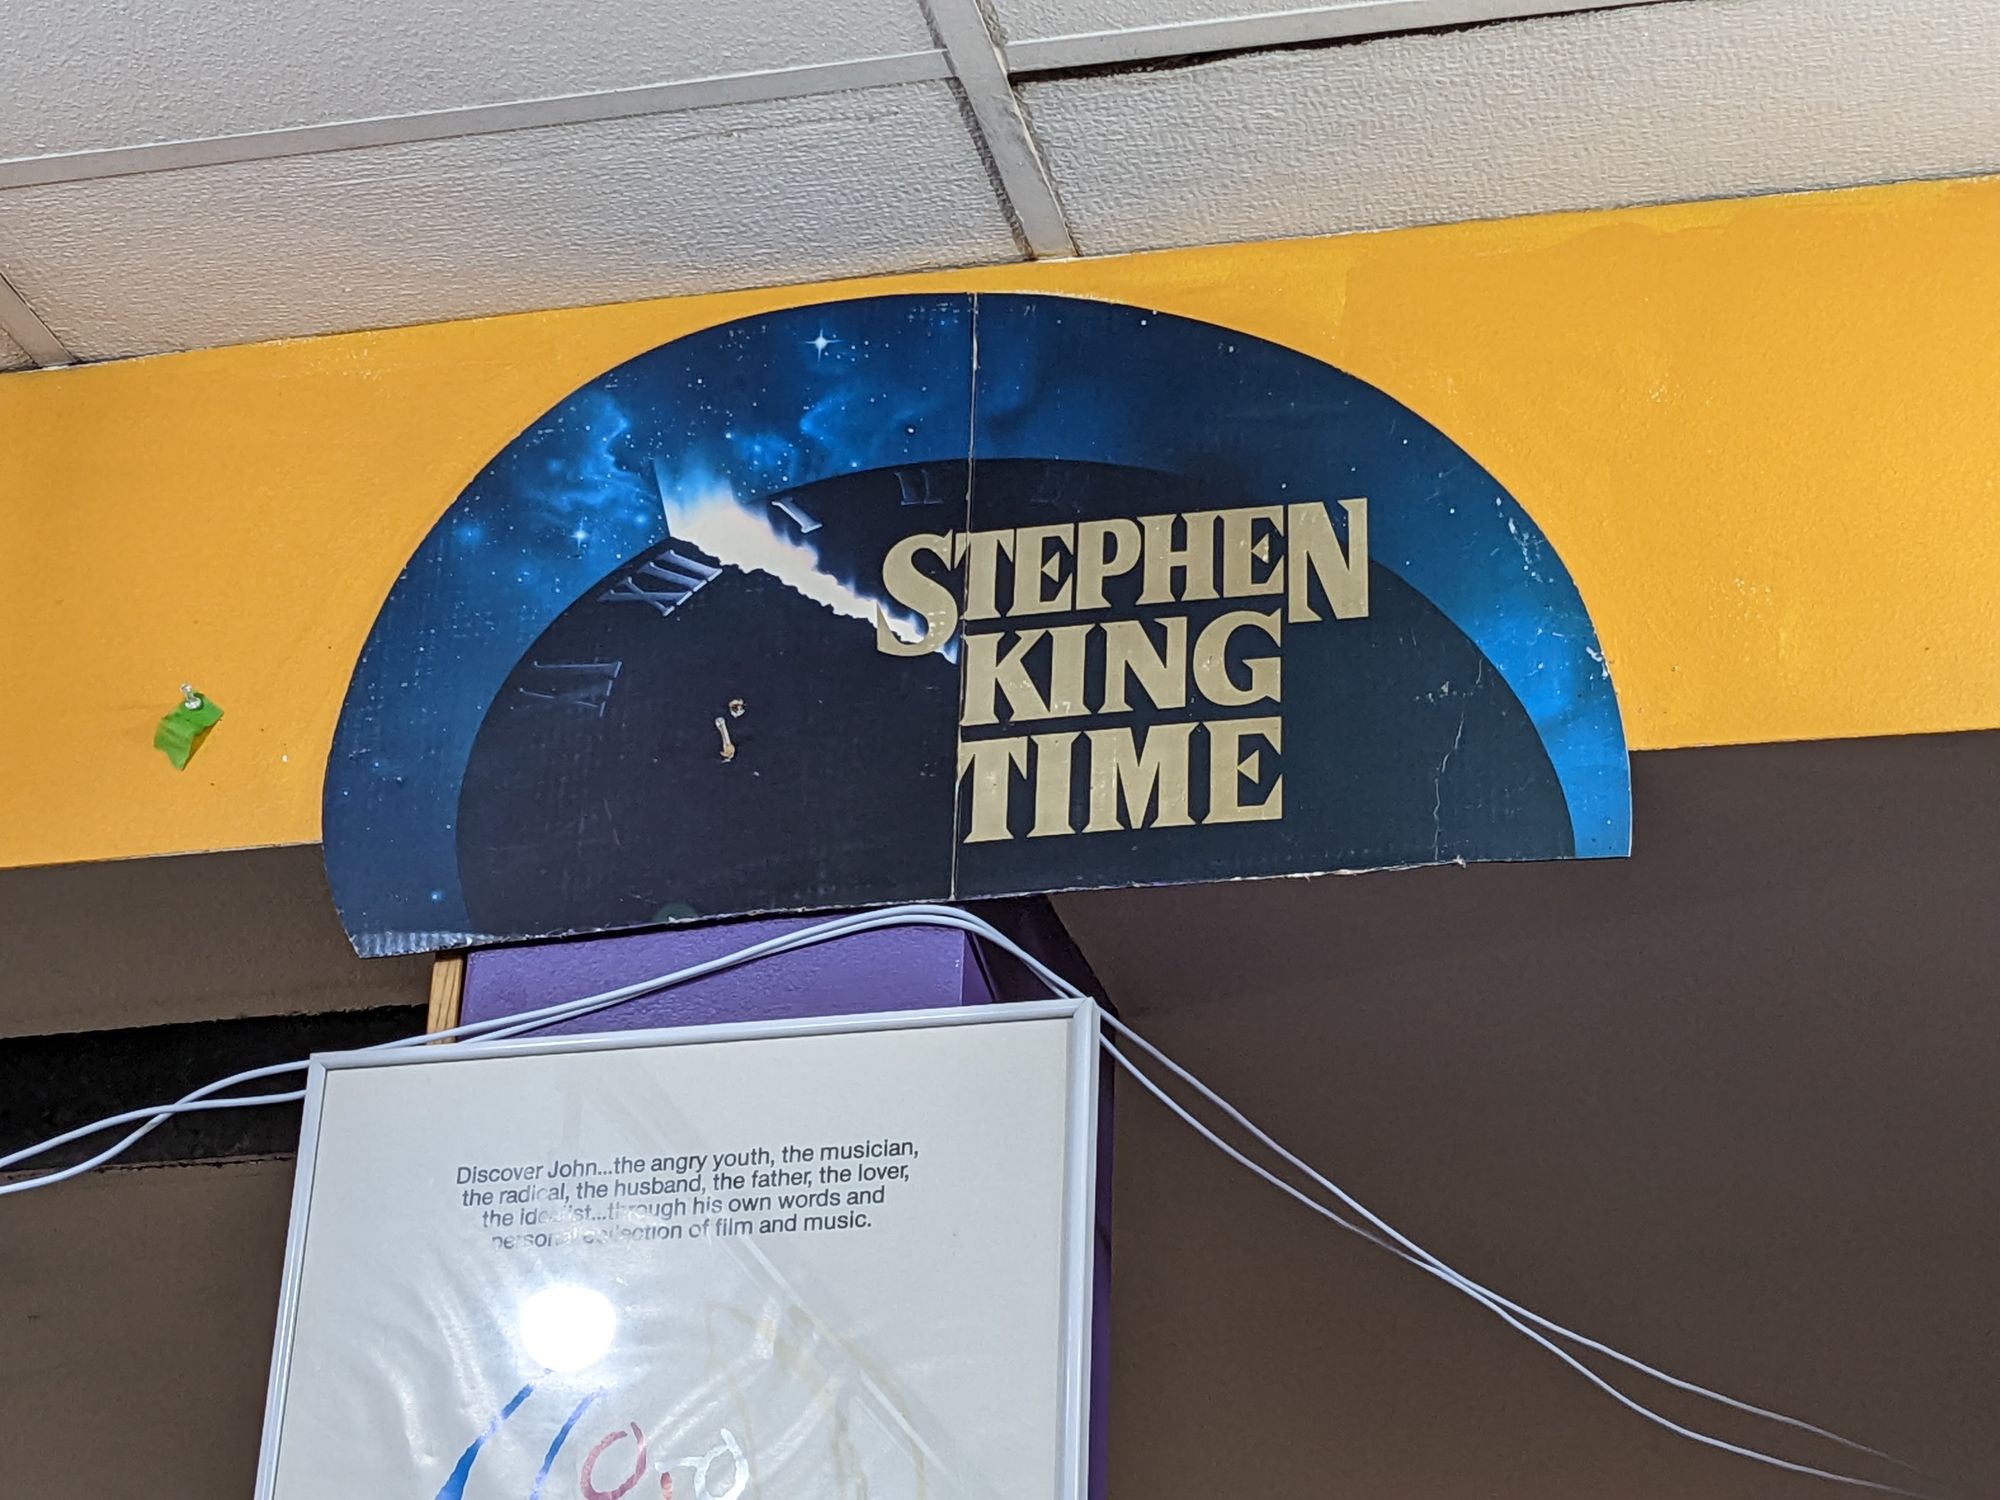 A mounted promotional sign that says "Stephen King Time."